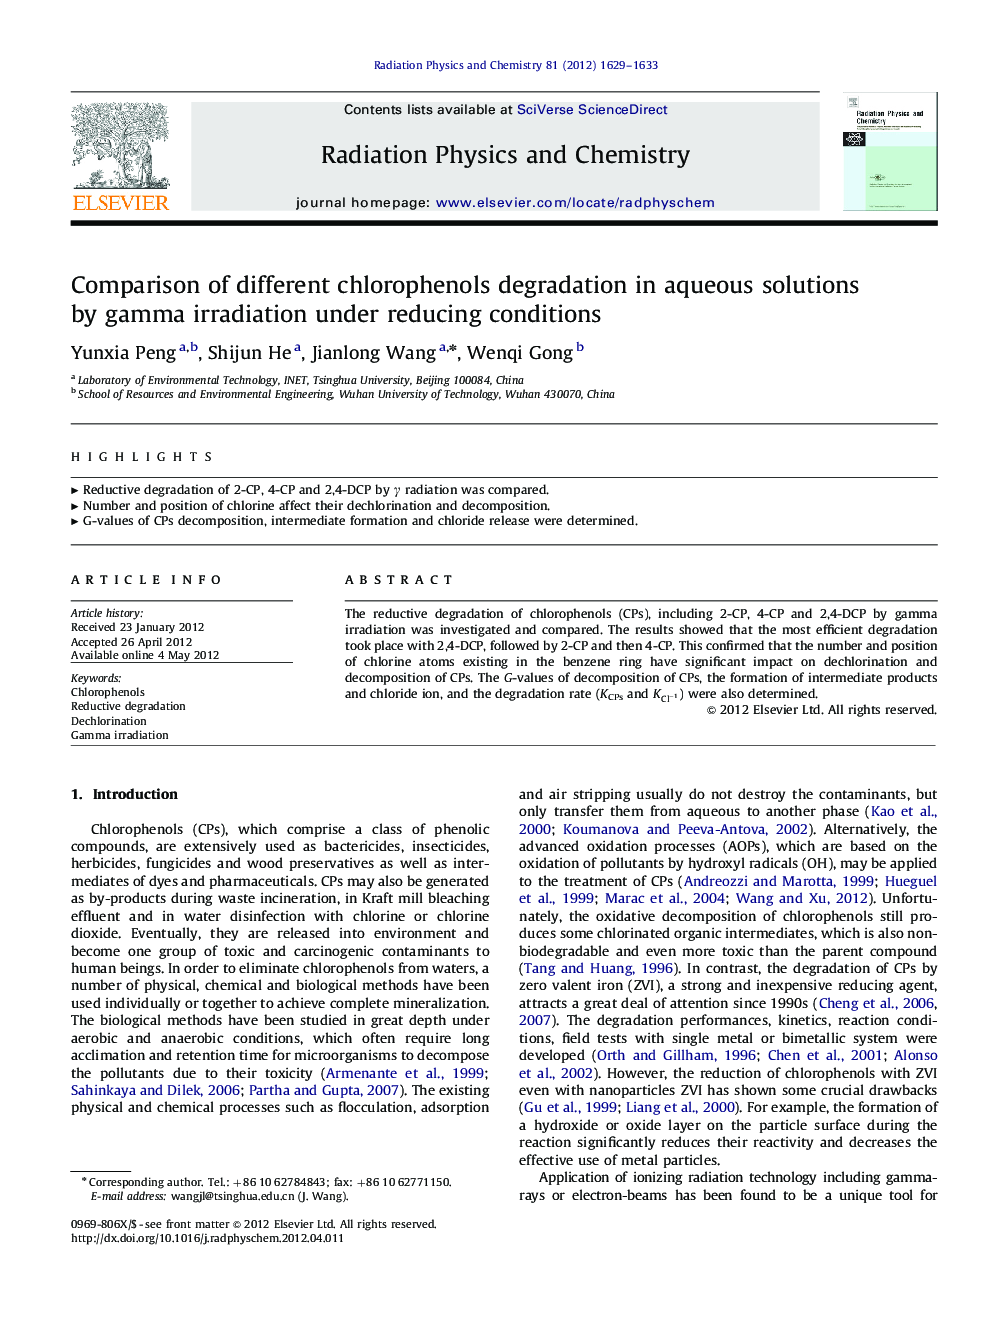 Comparison of different chlorophenols degradation in aqueous solutions by gamma irradiation under reducing conditions